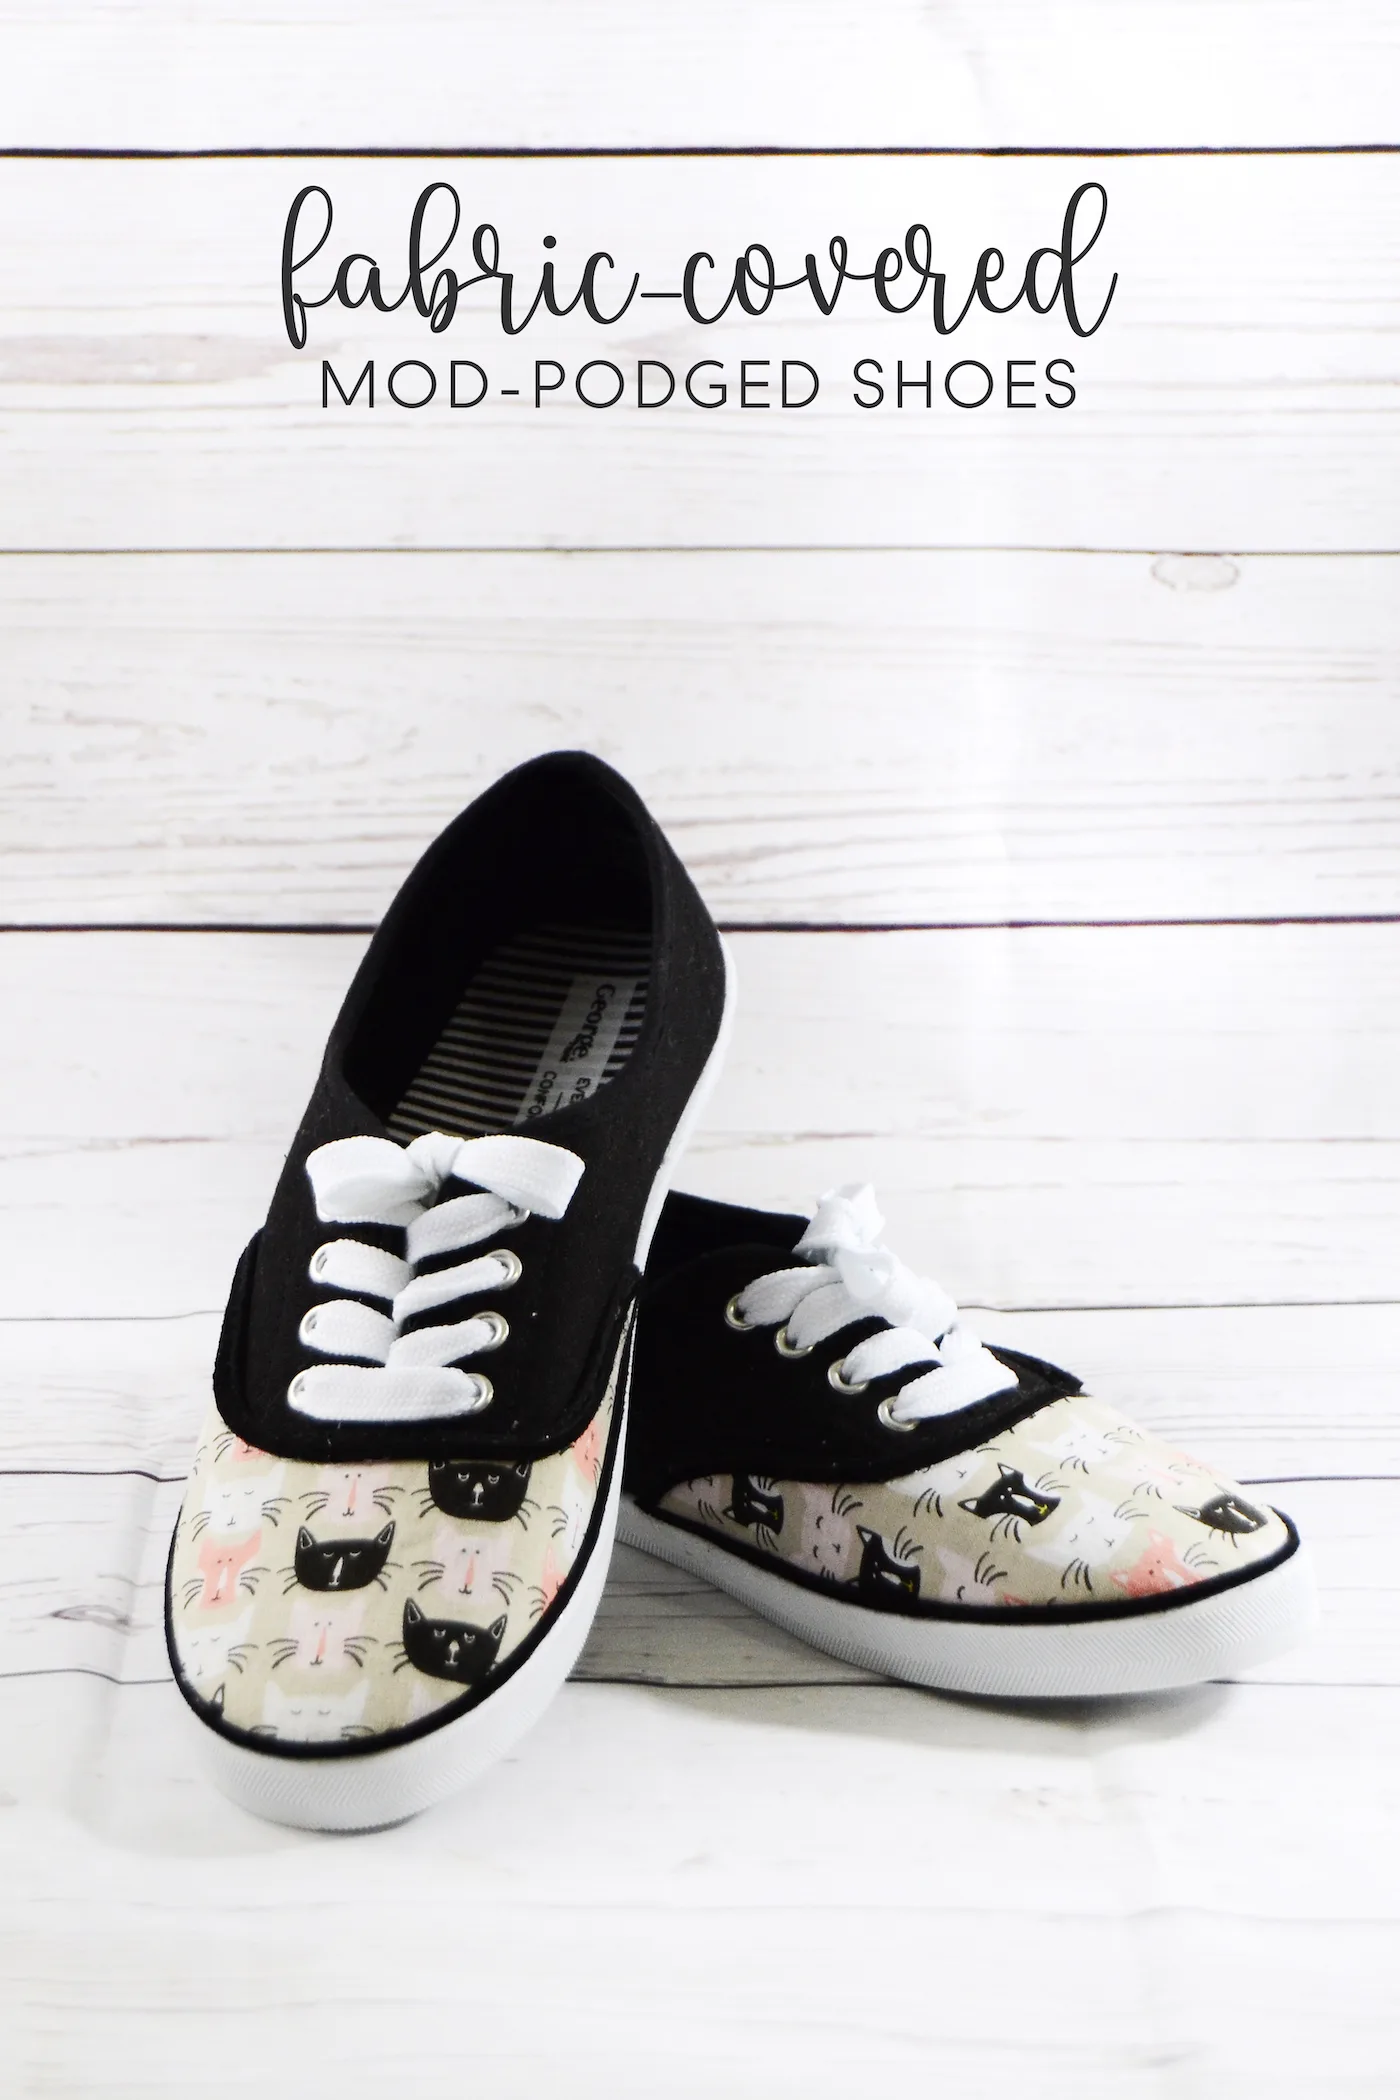 Cover Shoes in Fabric with Mod Podge! - Mod Podge Rocks